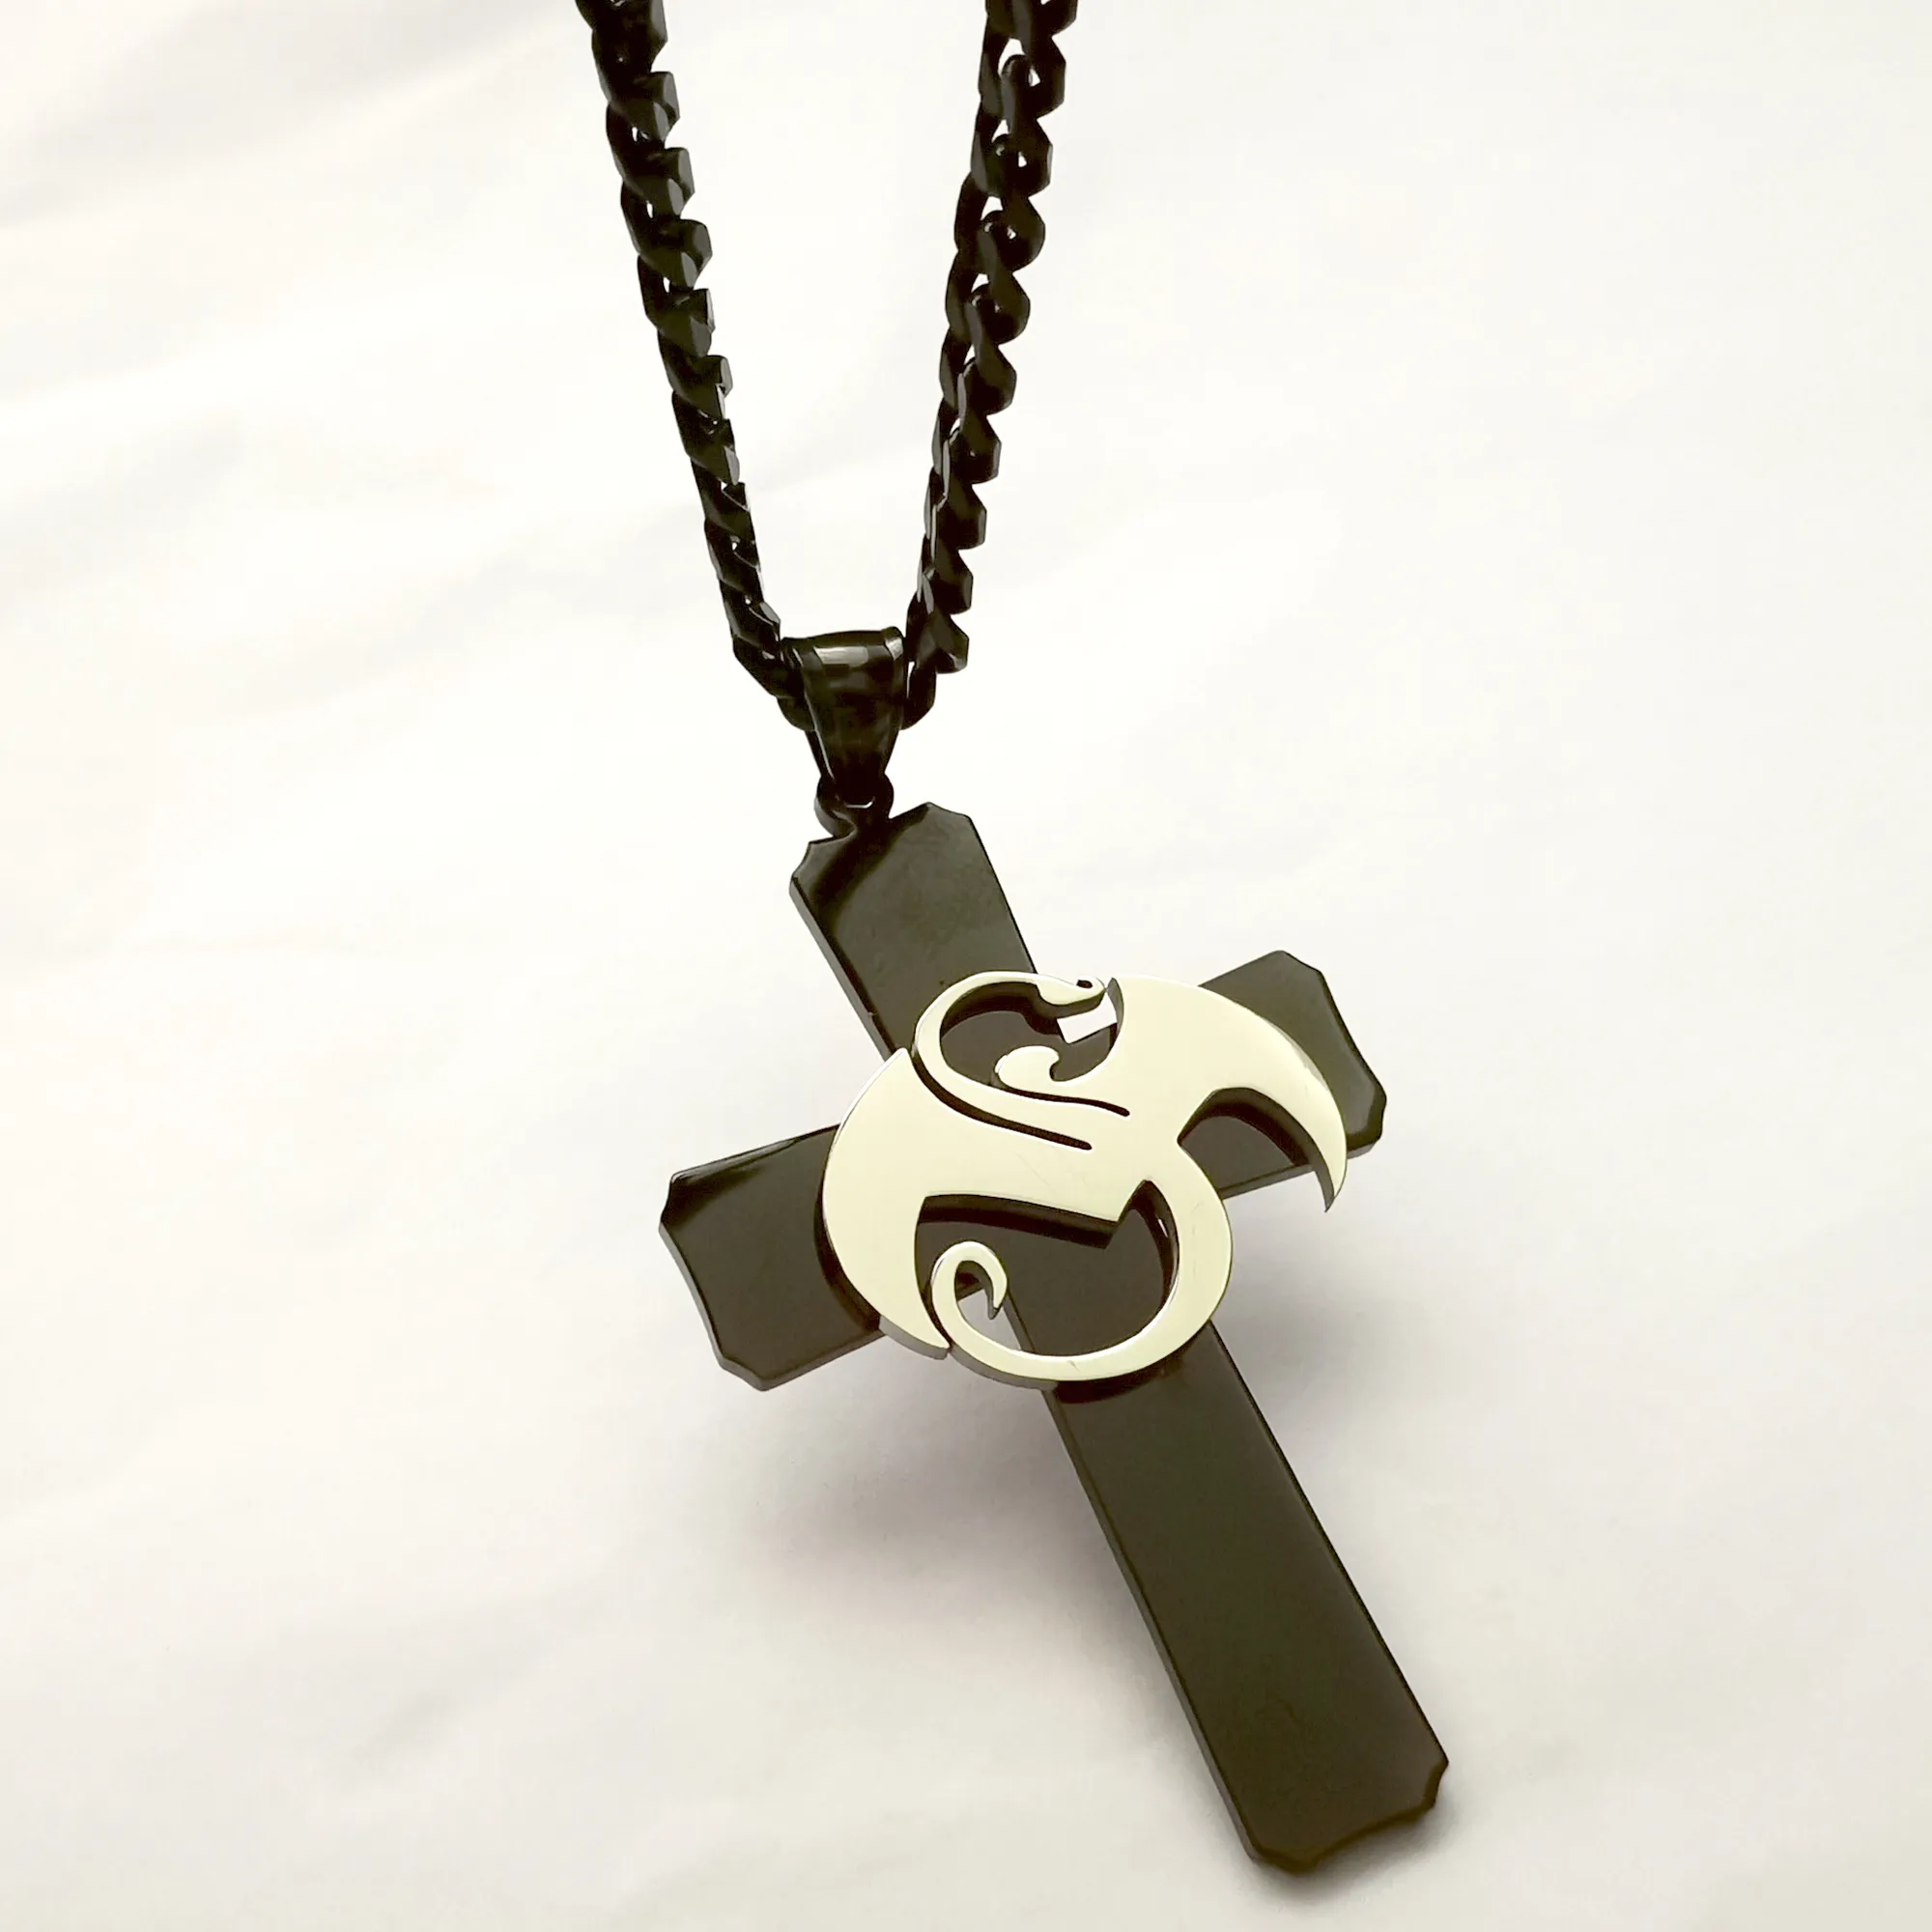 Large Strange music dragon charms stainless steel black cross pendant necklace w 5mm 24' Curb Chain ICP Jugallo266R